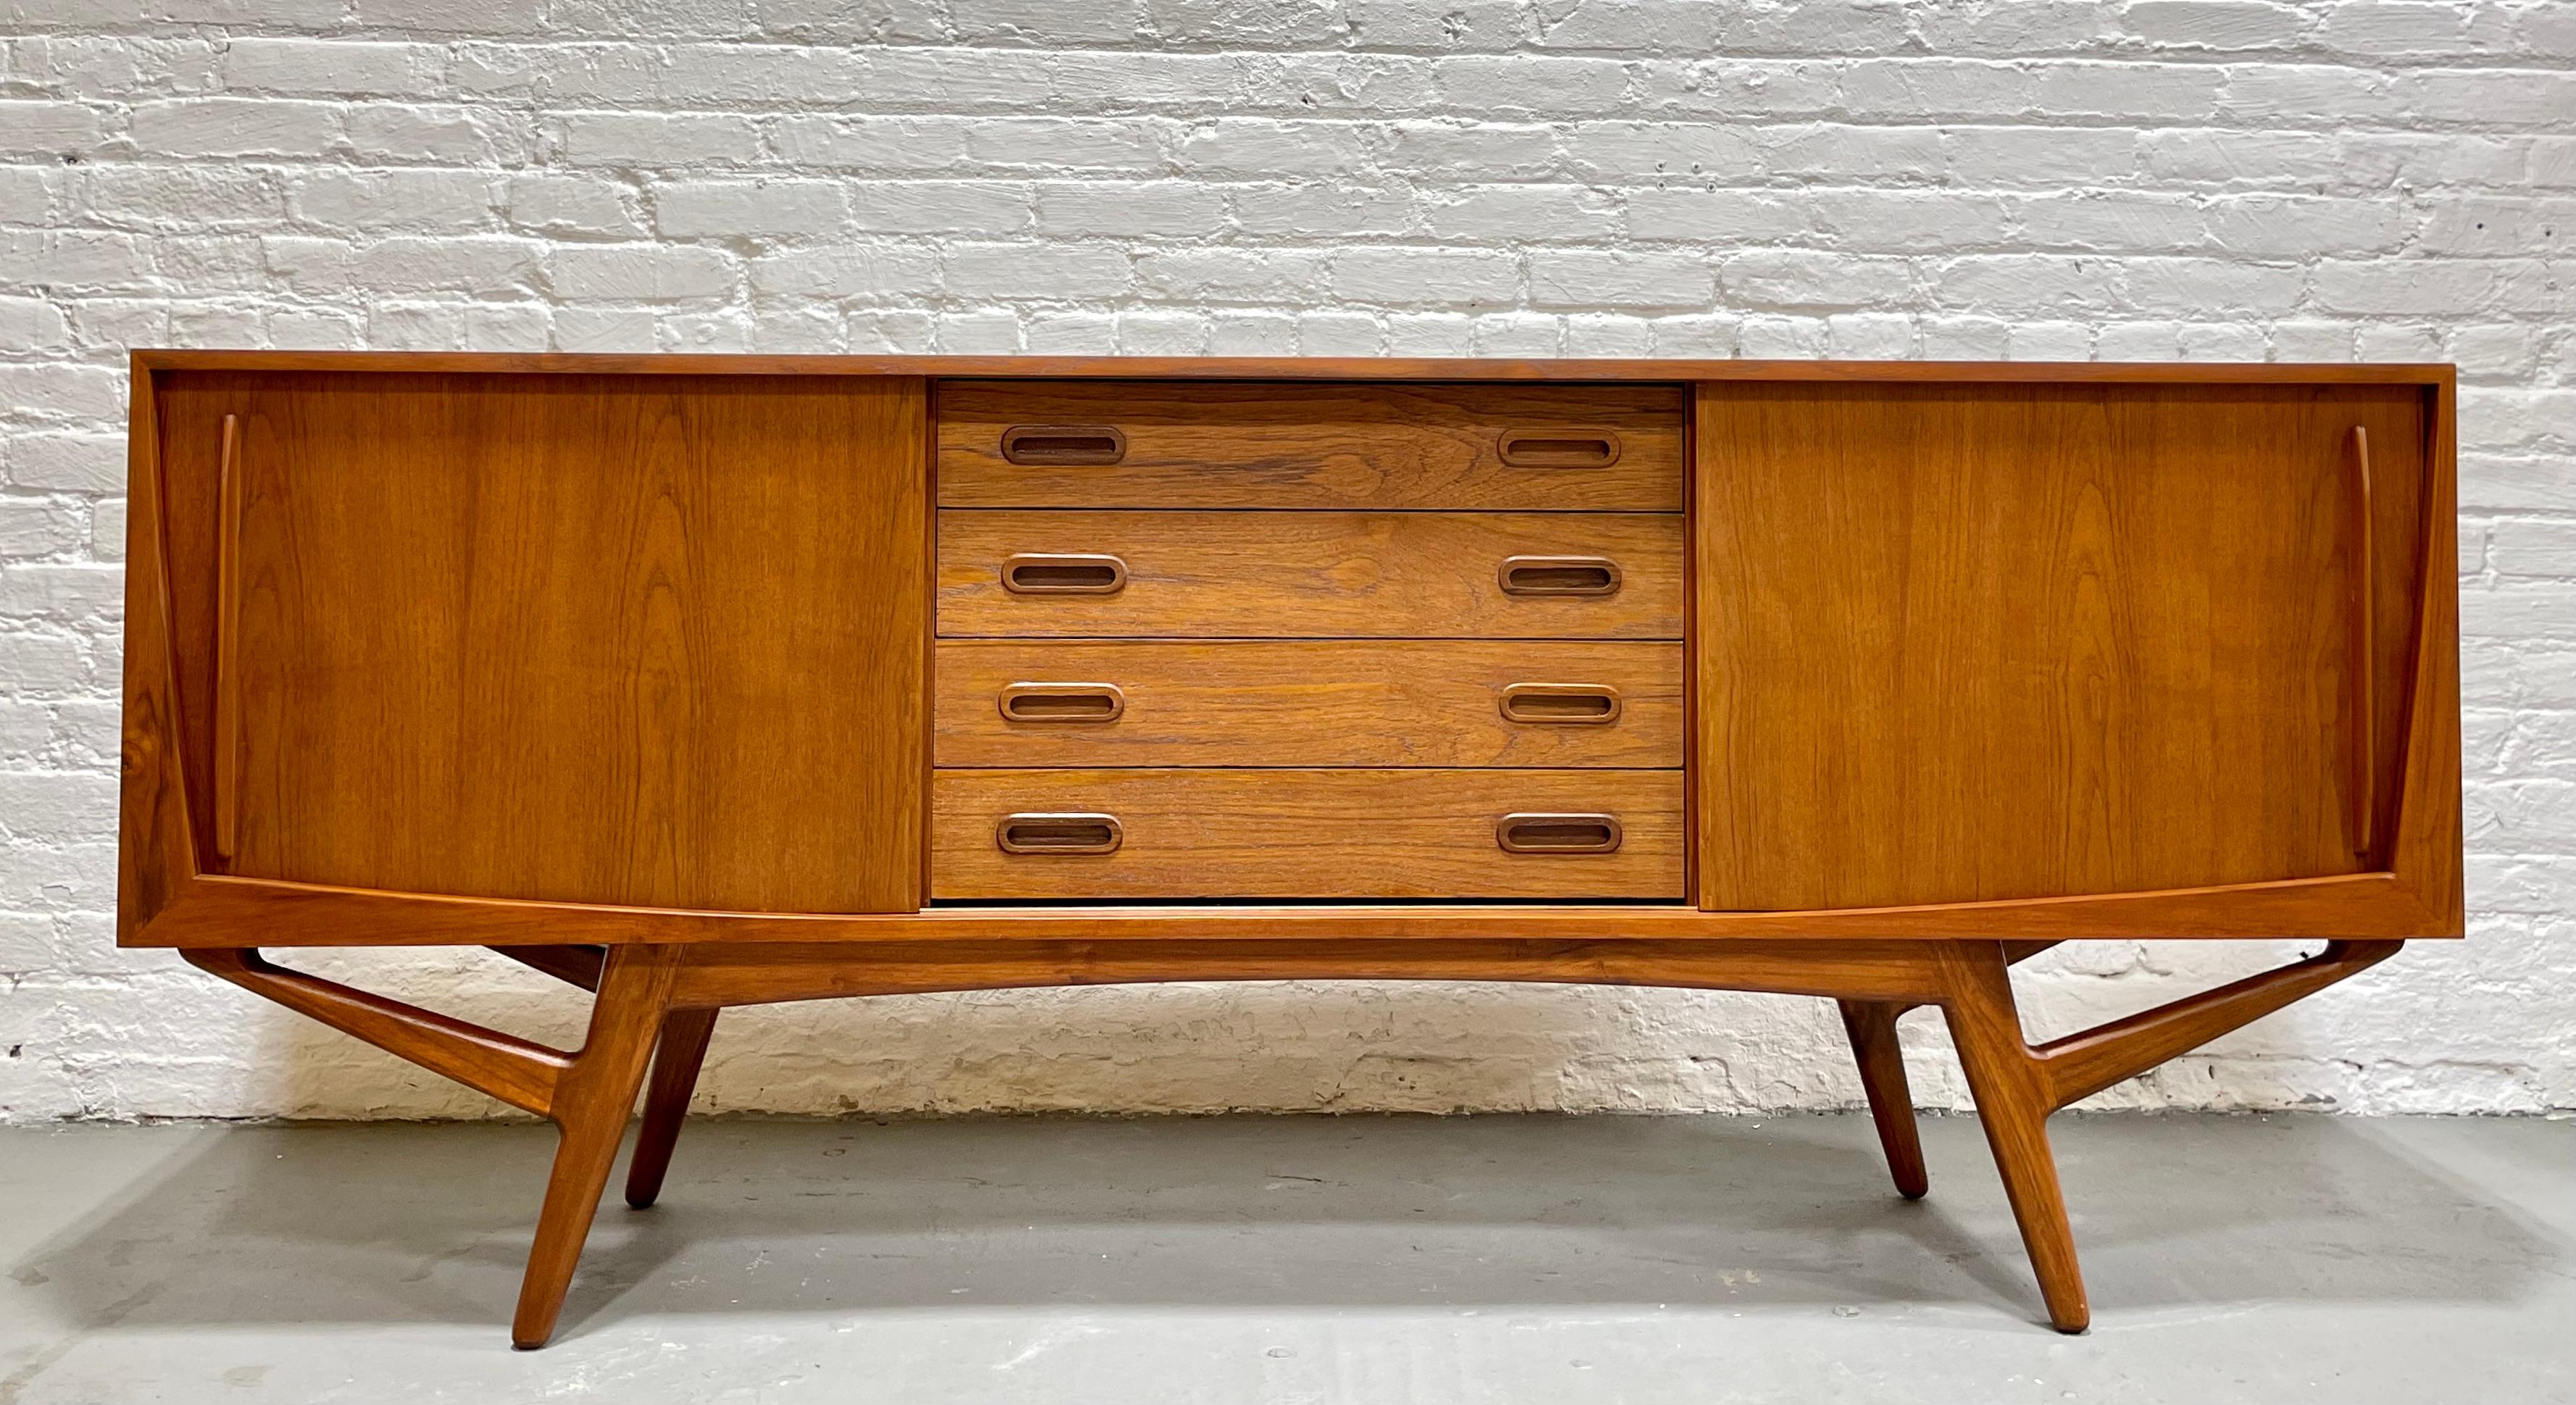 Handmade Mid-Century Modern styled Teak Credenza / Sideboard In New Condition For Sale In Weehawken, NJ